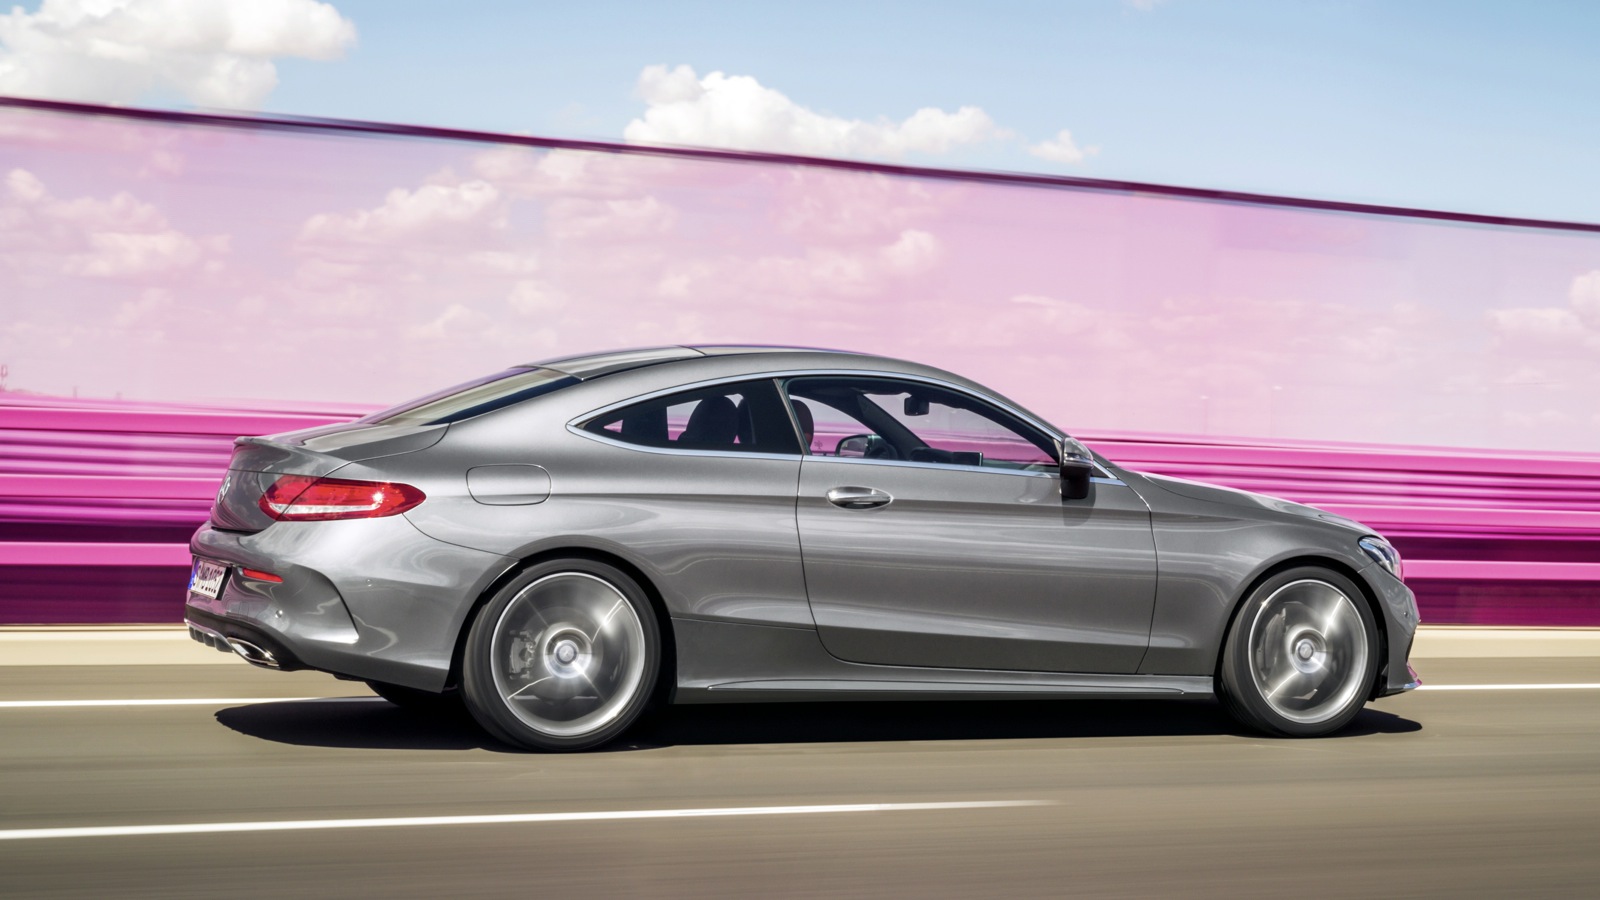 2016 Mercedes Benz C Class Coupe Revealed Photos 1 Of 36